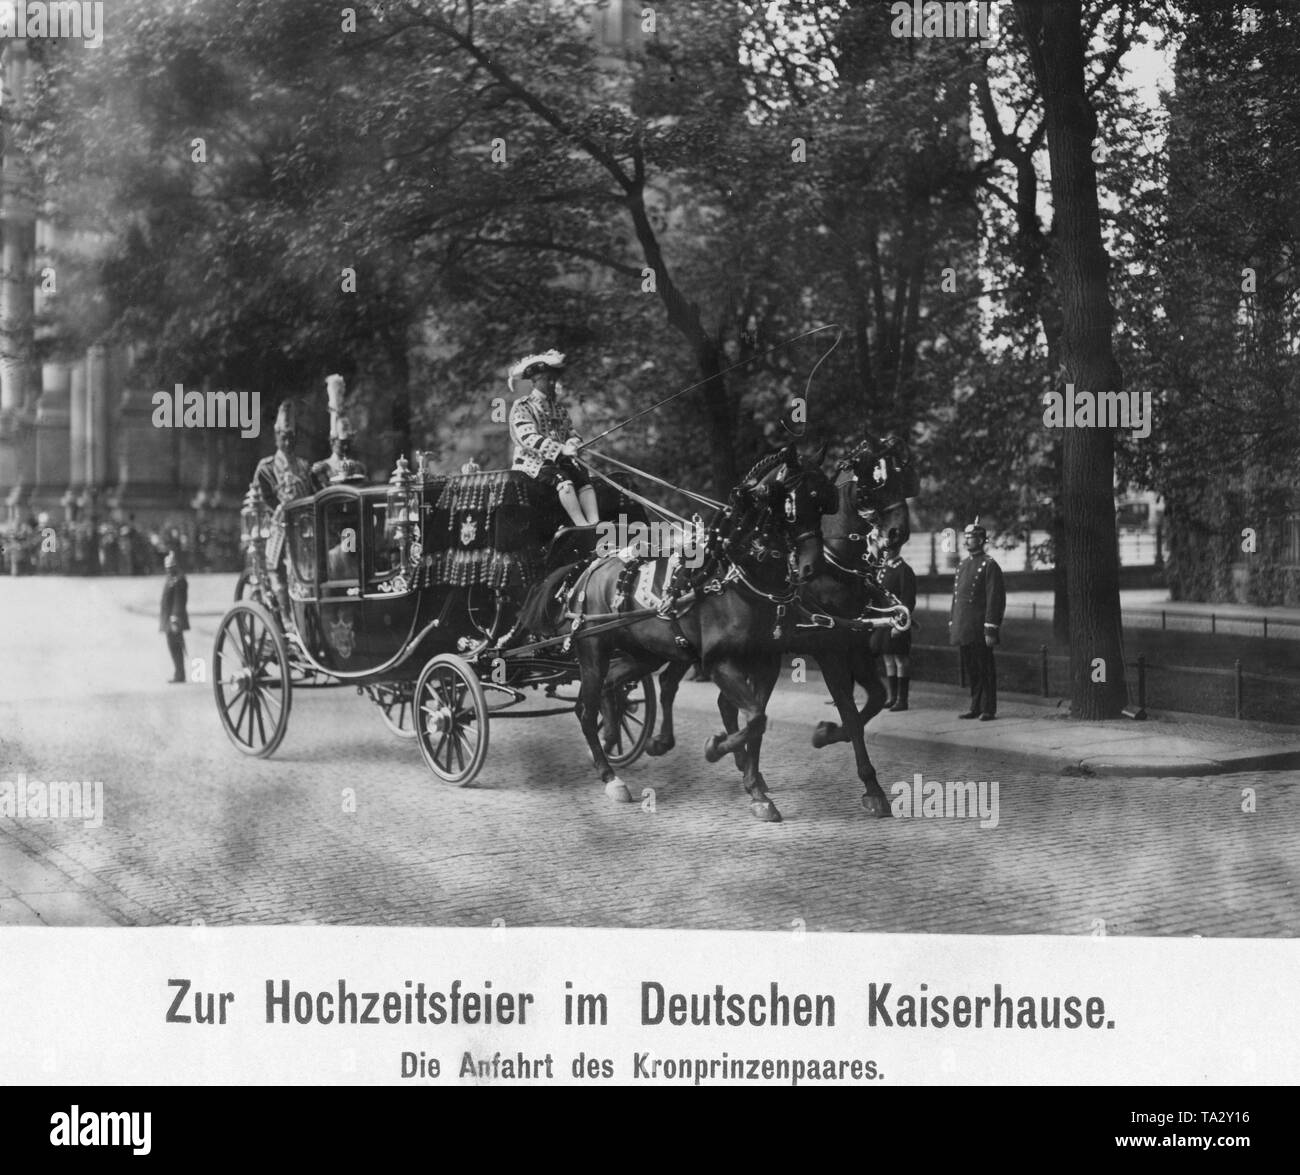 Crown Prince Wilhelm of Prussia and his wife Crown Princess Cecilie ride in a carriage through Berlin. The photo was taken as part of the wedding ceremony of the sister of the Crown Prince, Princess Viktoria Luise of Prussia, with Prince Ernst August of Hanover. Stock Photo